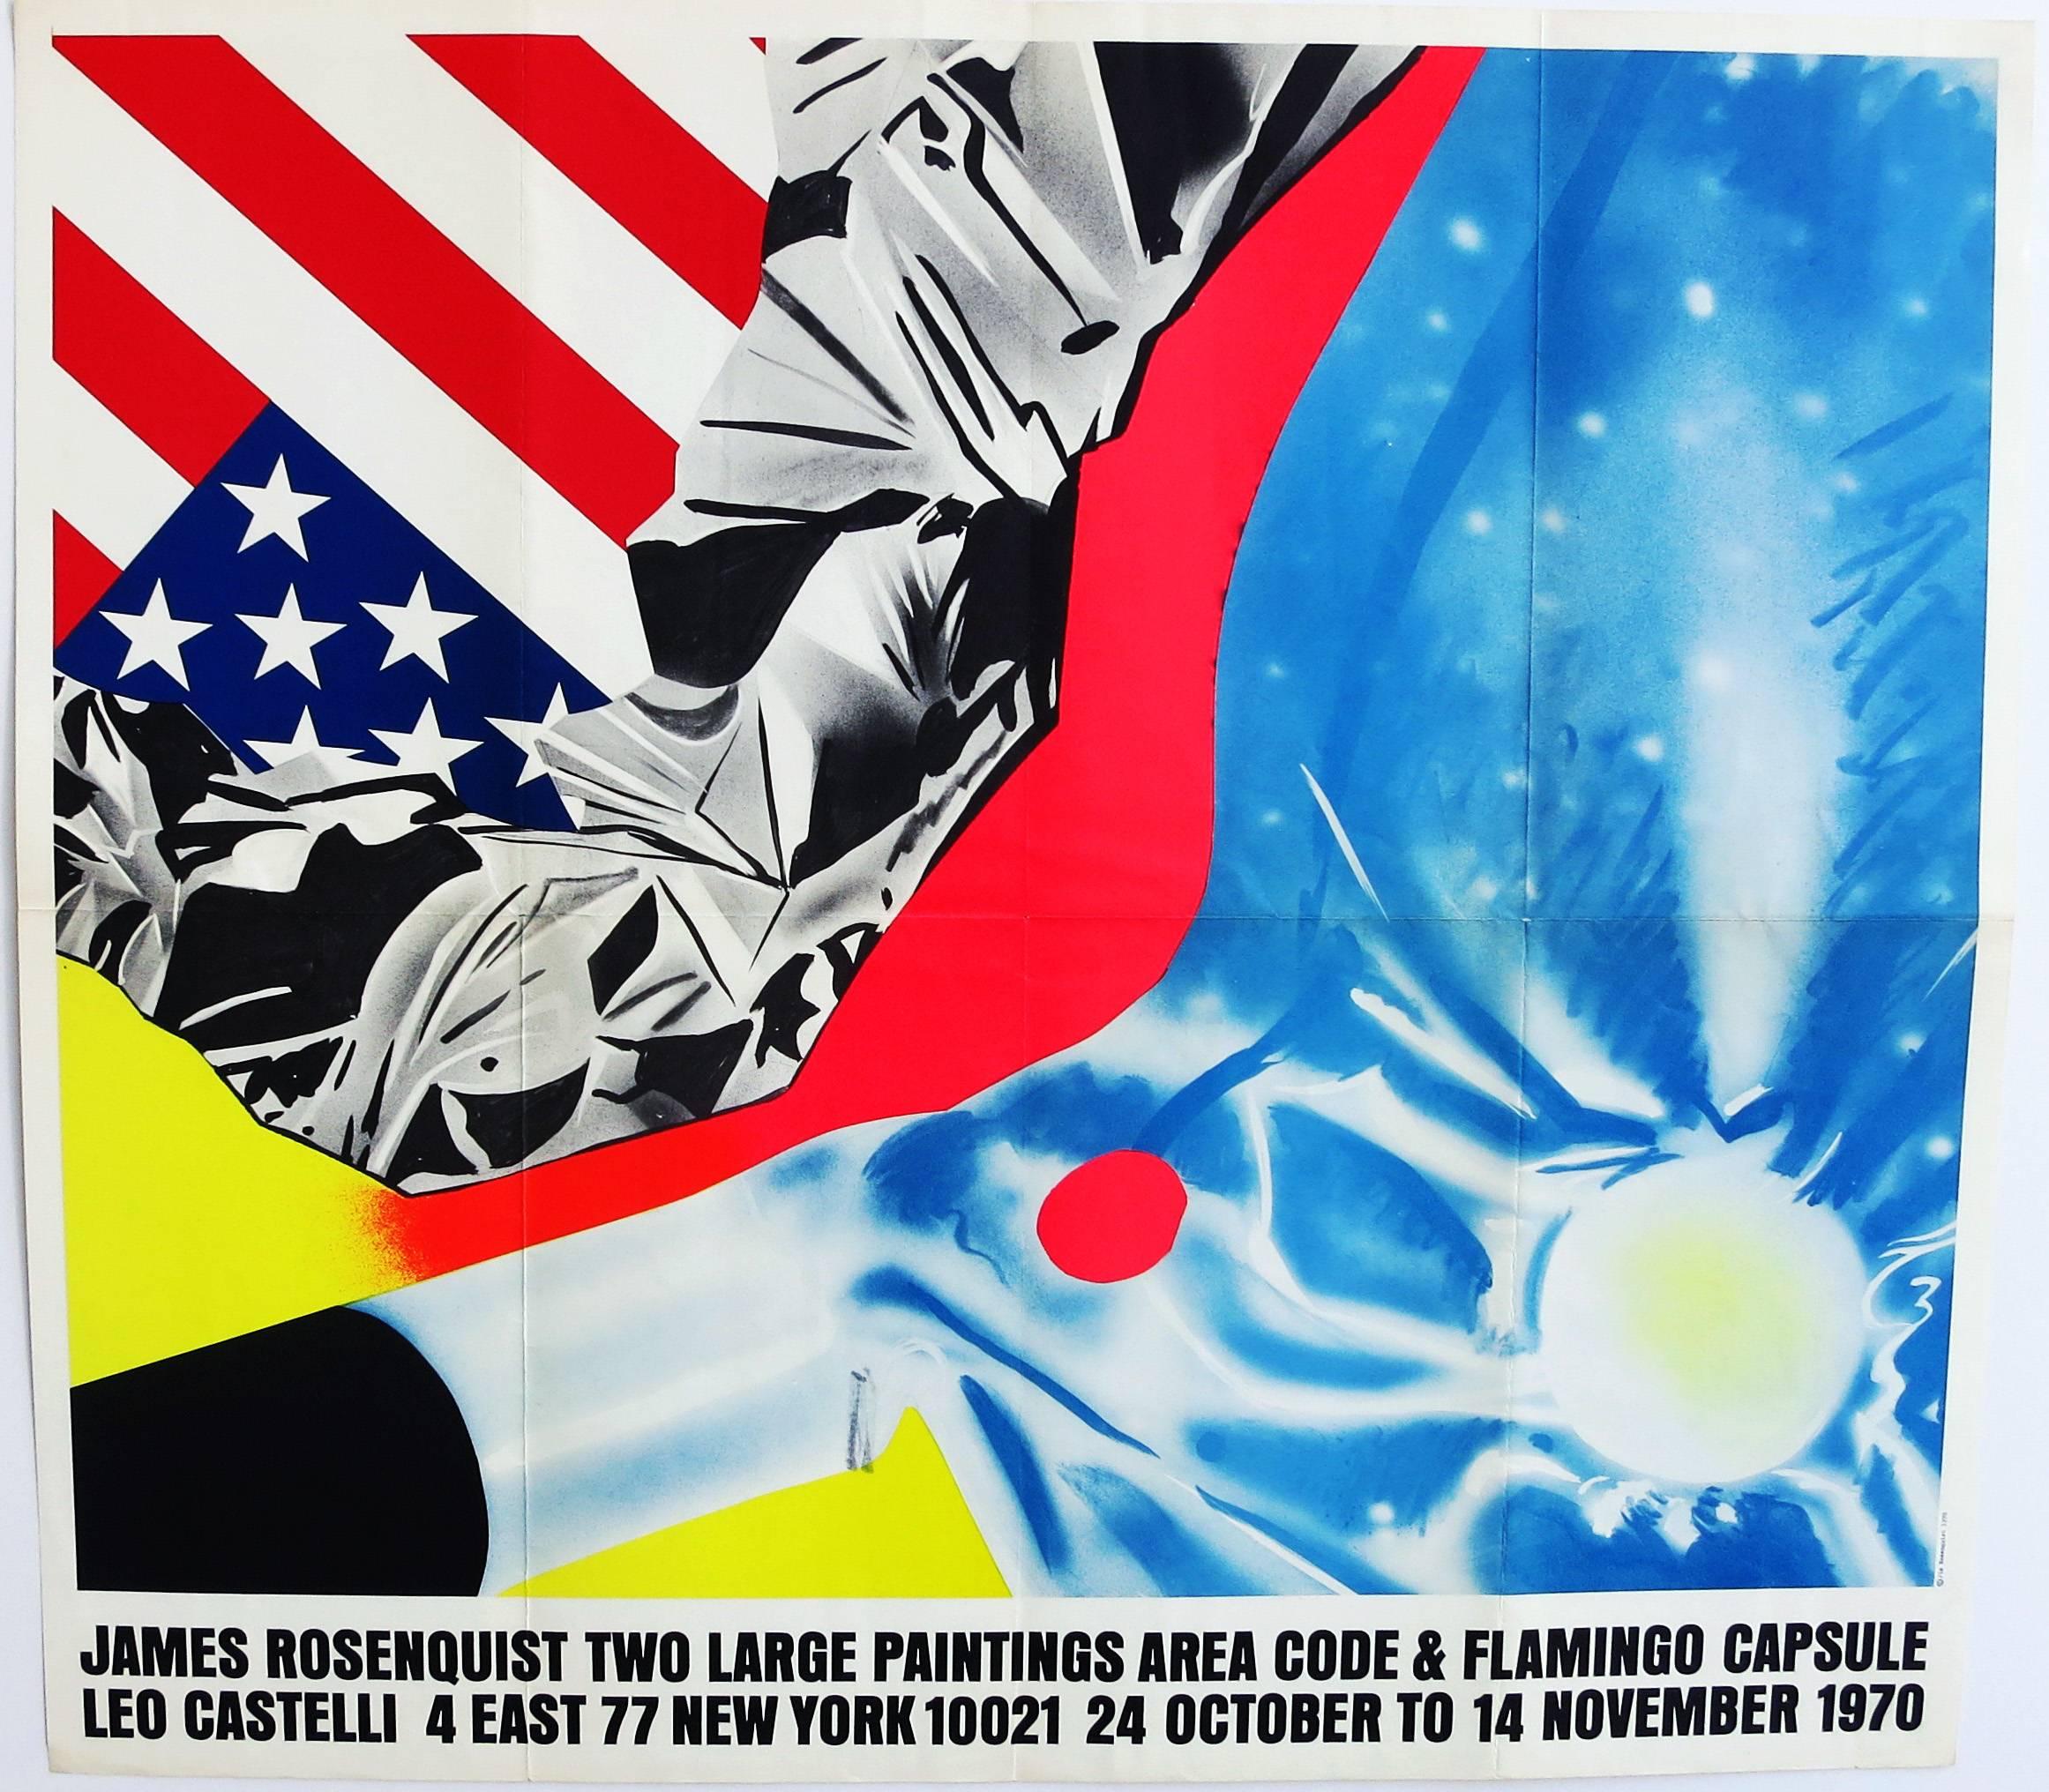 James Rosenquist announcement poster (Leo Castelli early 1970s) - Contemporary Art by (after) James Rosenquist